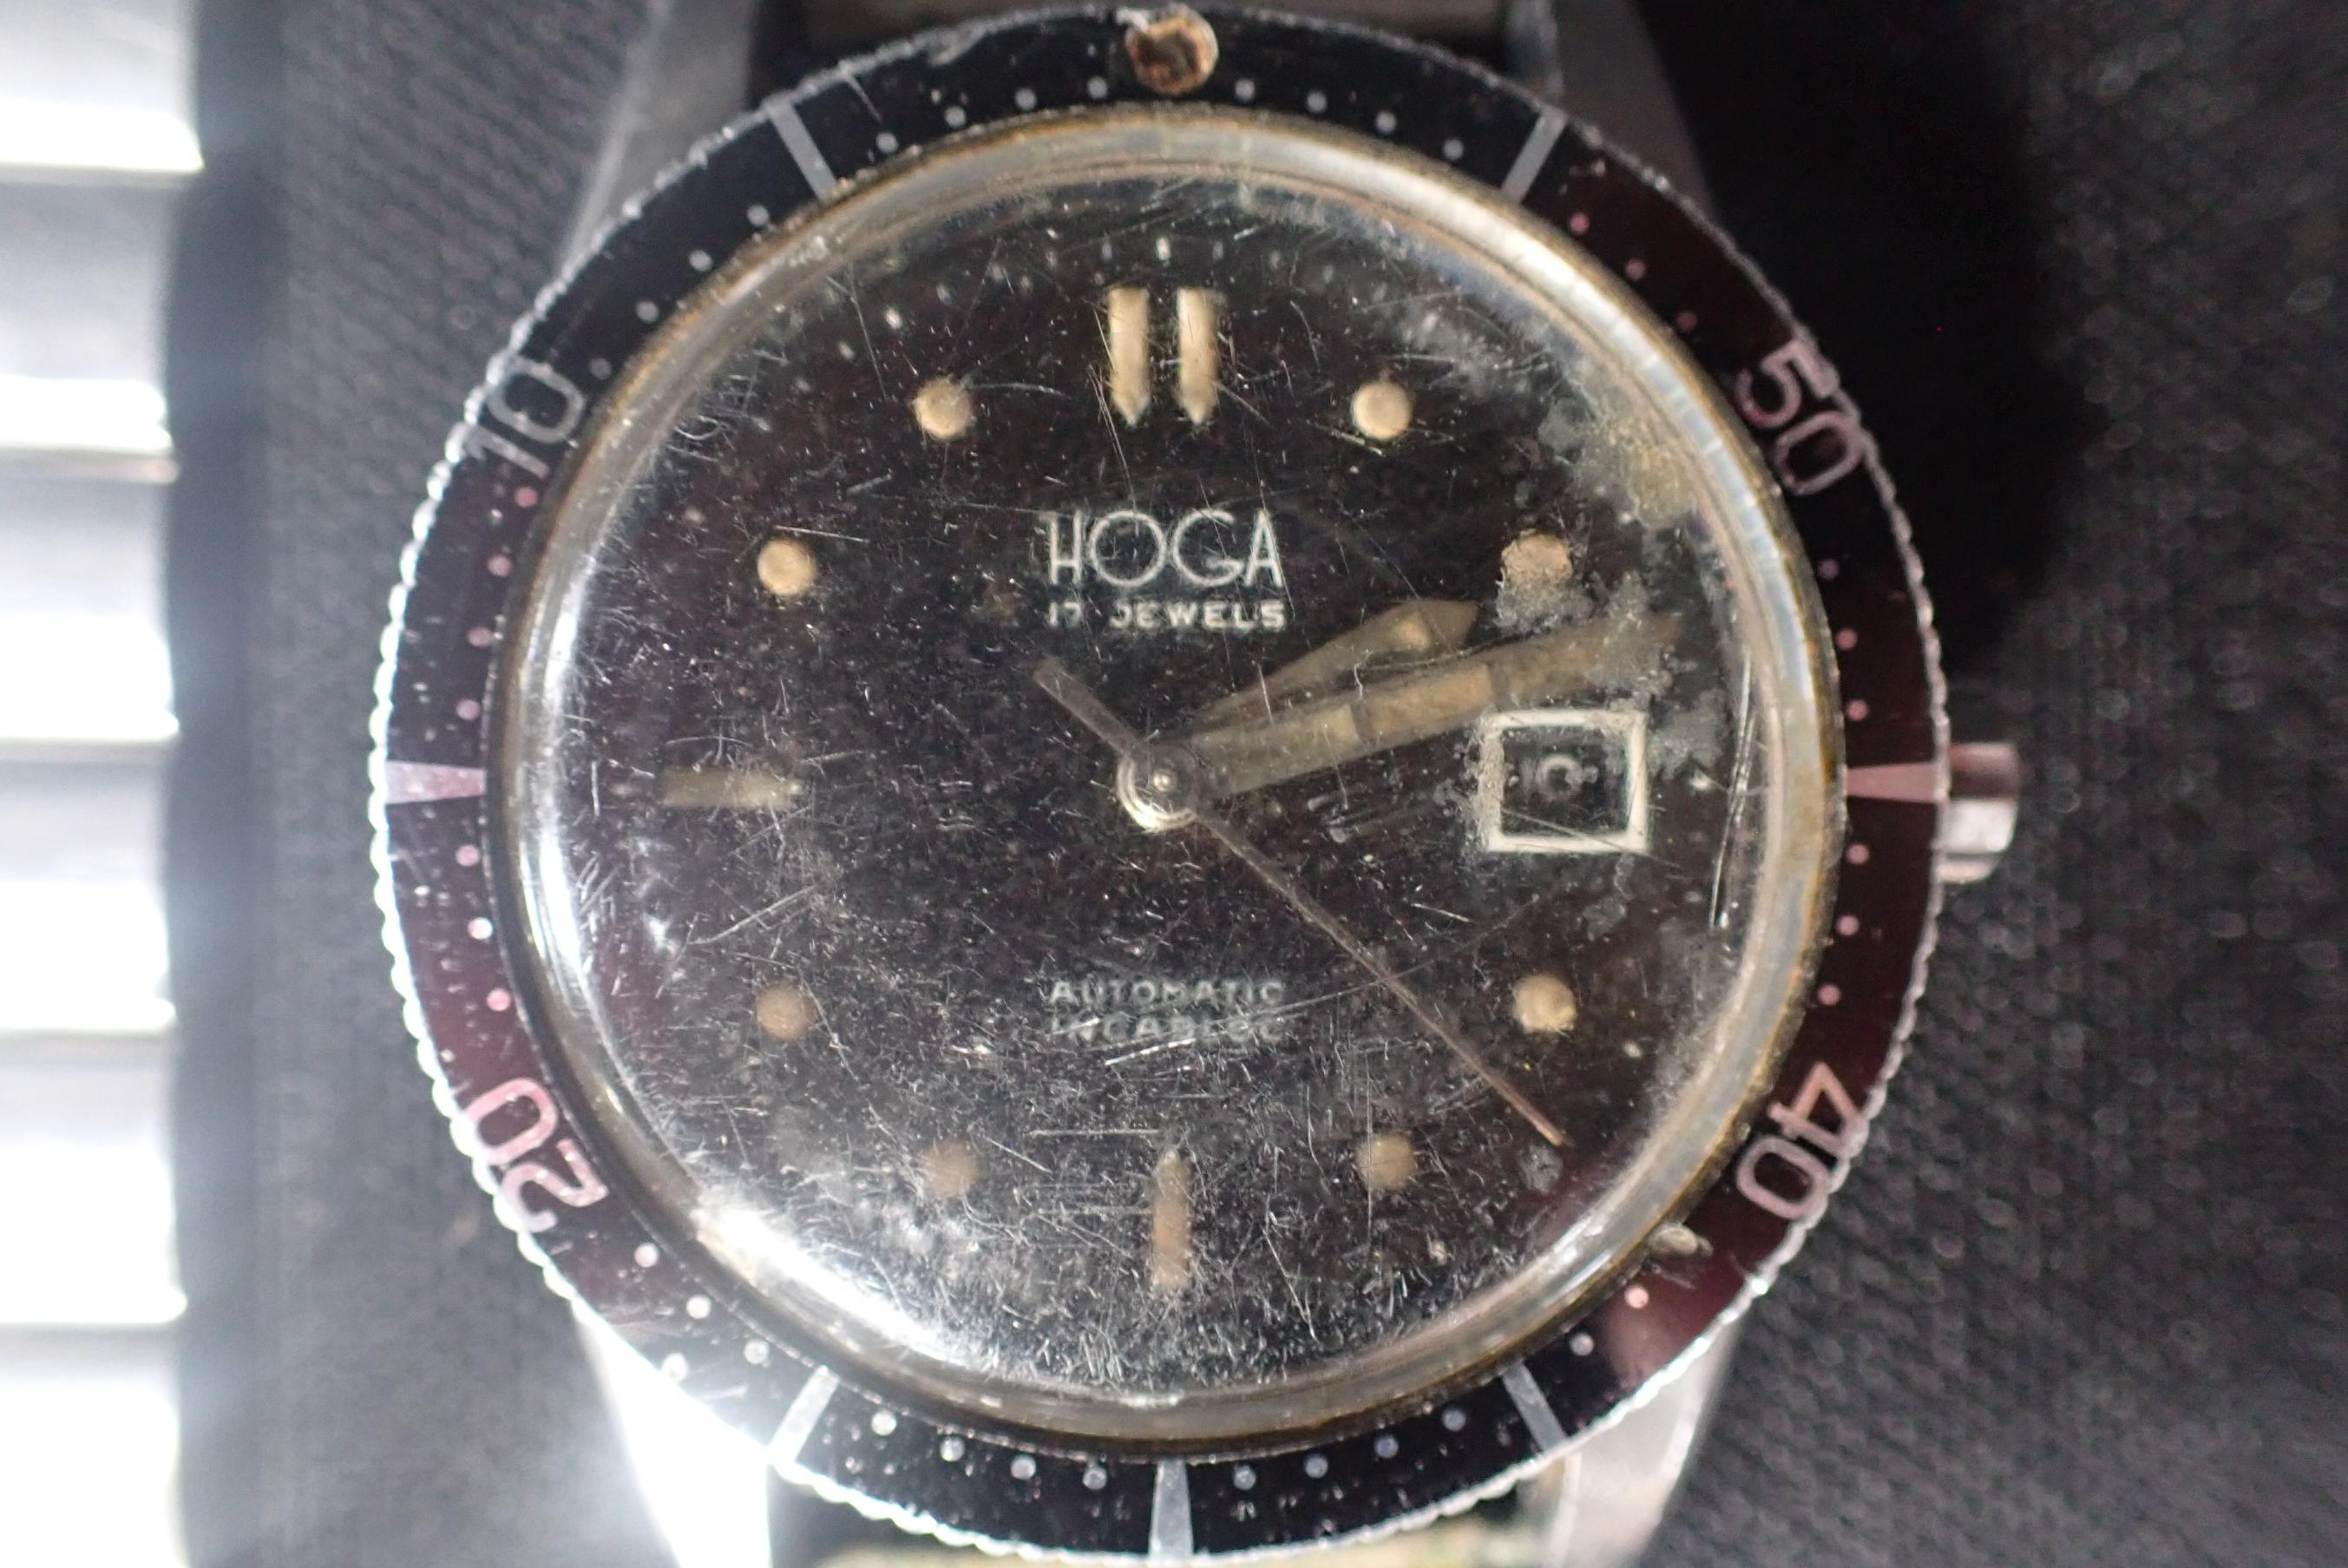 HOGA: A GENTLEMAN'S STAINLESS STEEL DIVING WATCH - Image 2 of 2